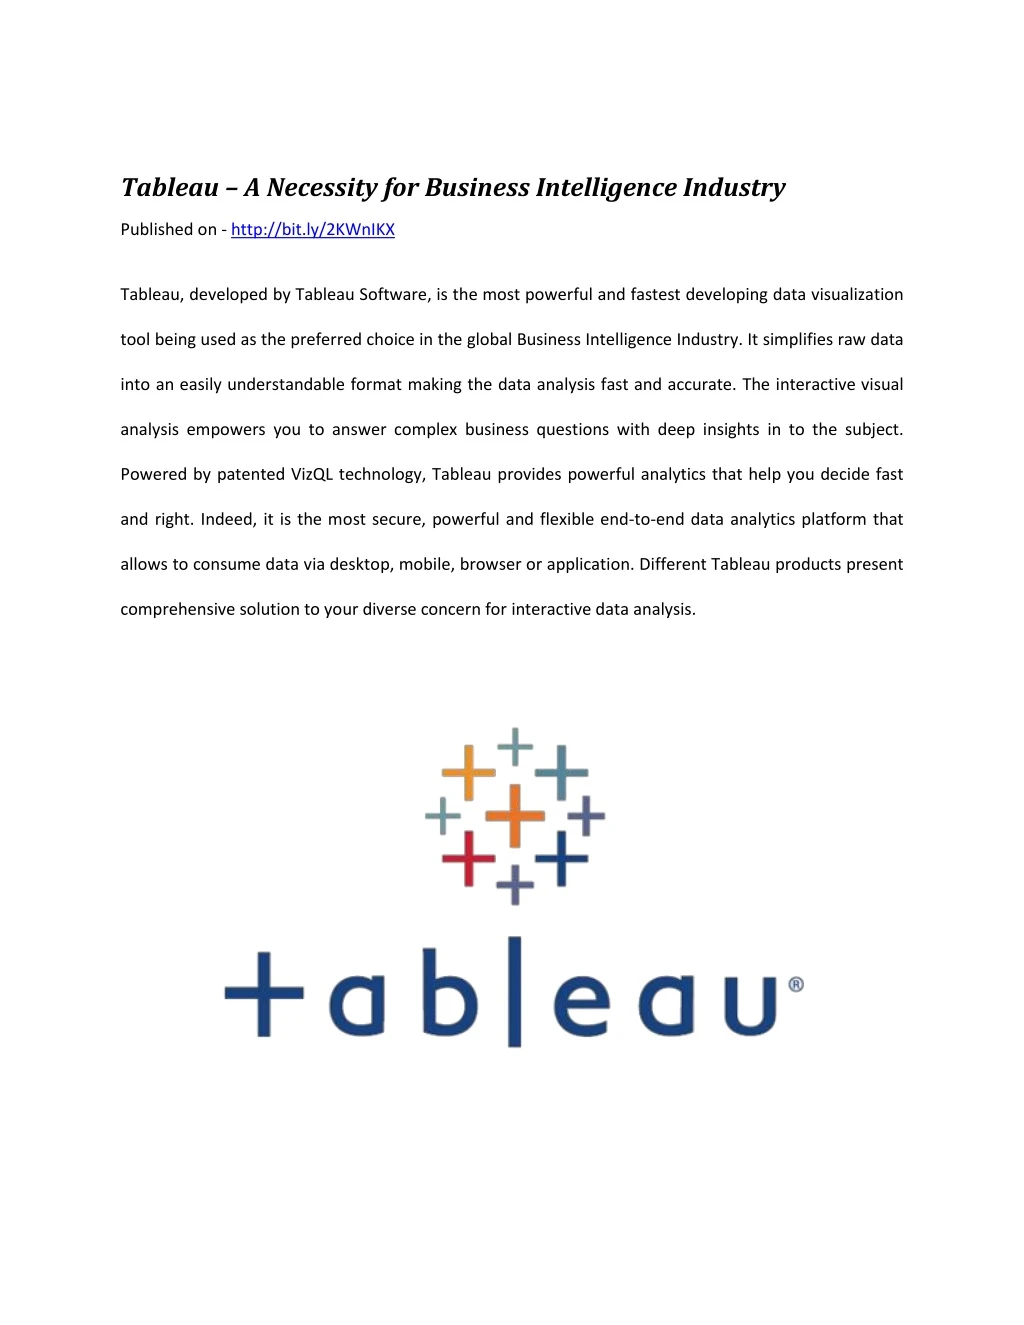 tableau a necessity for business intelligence